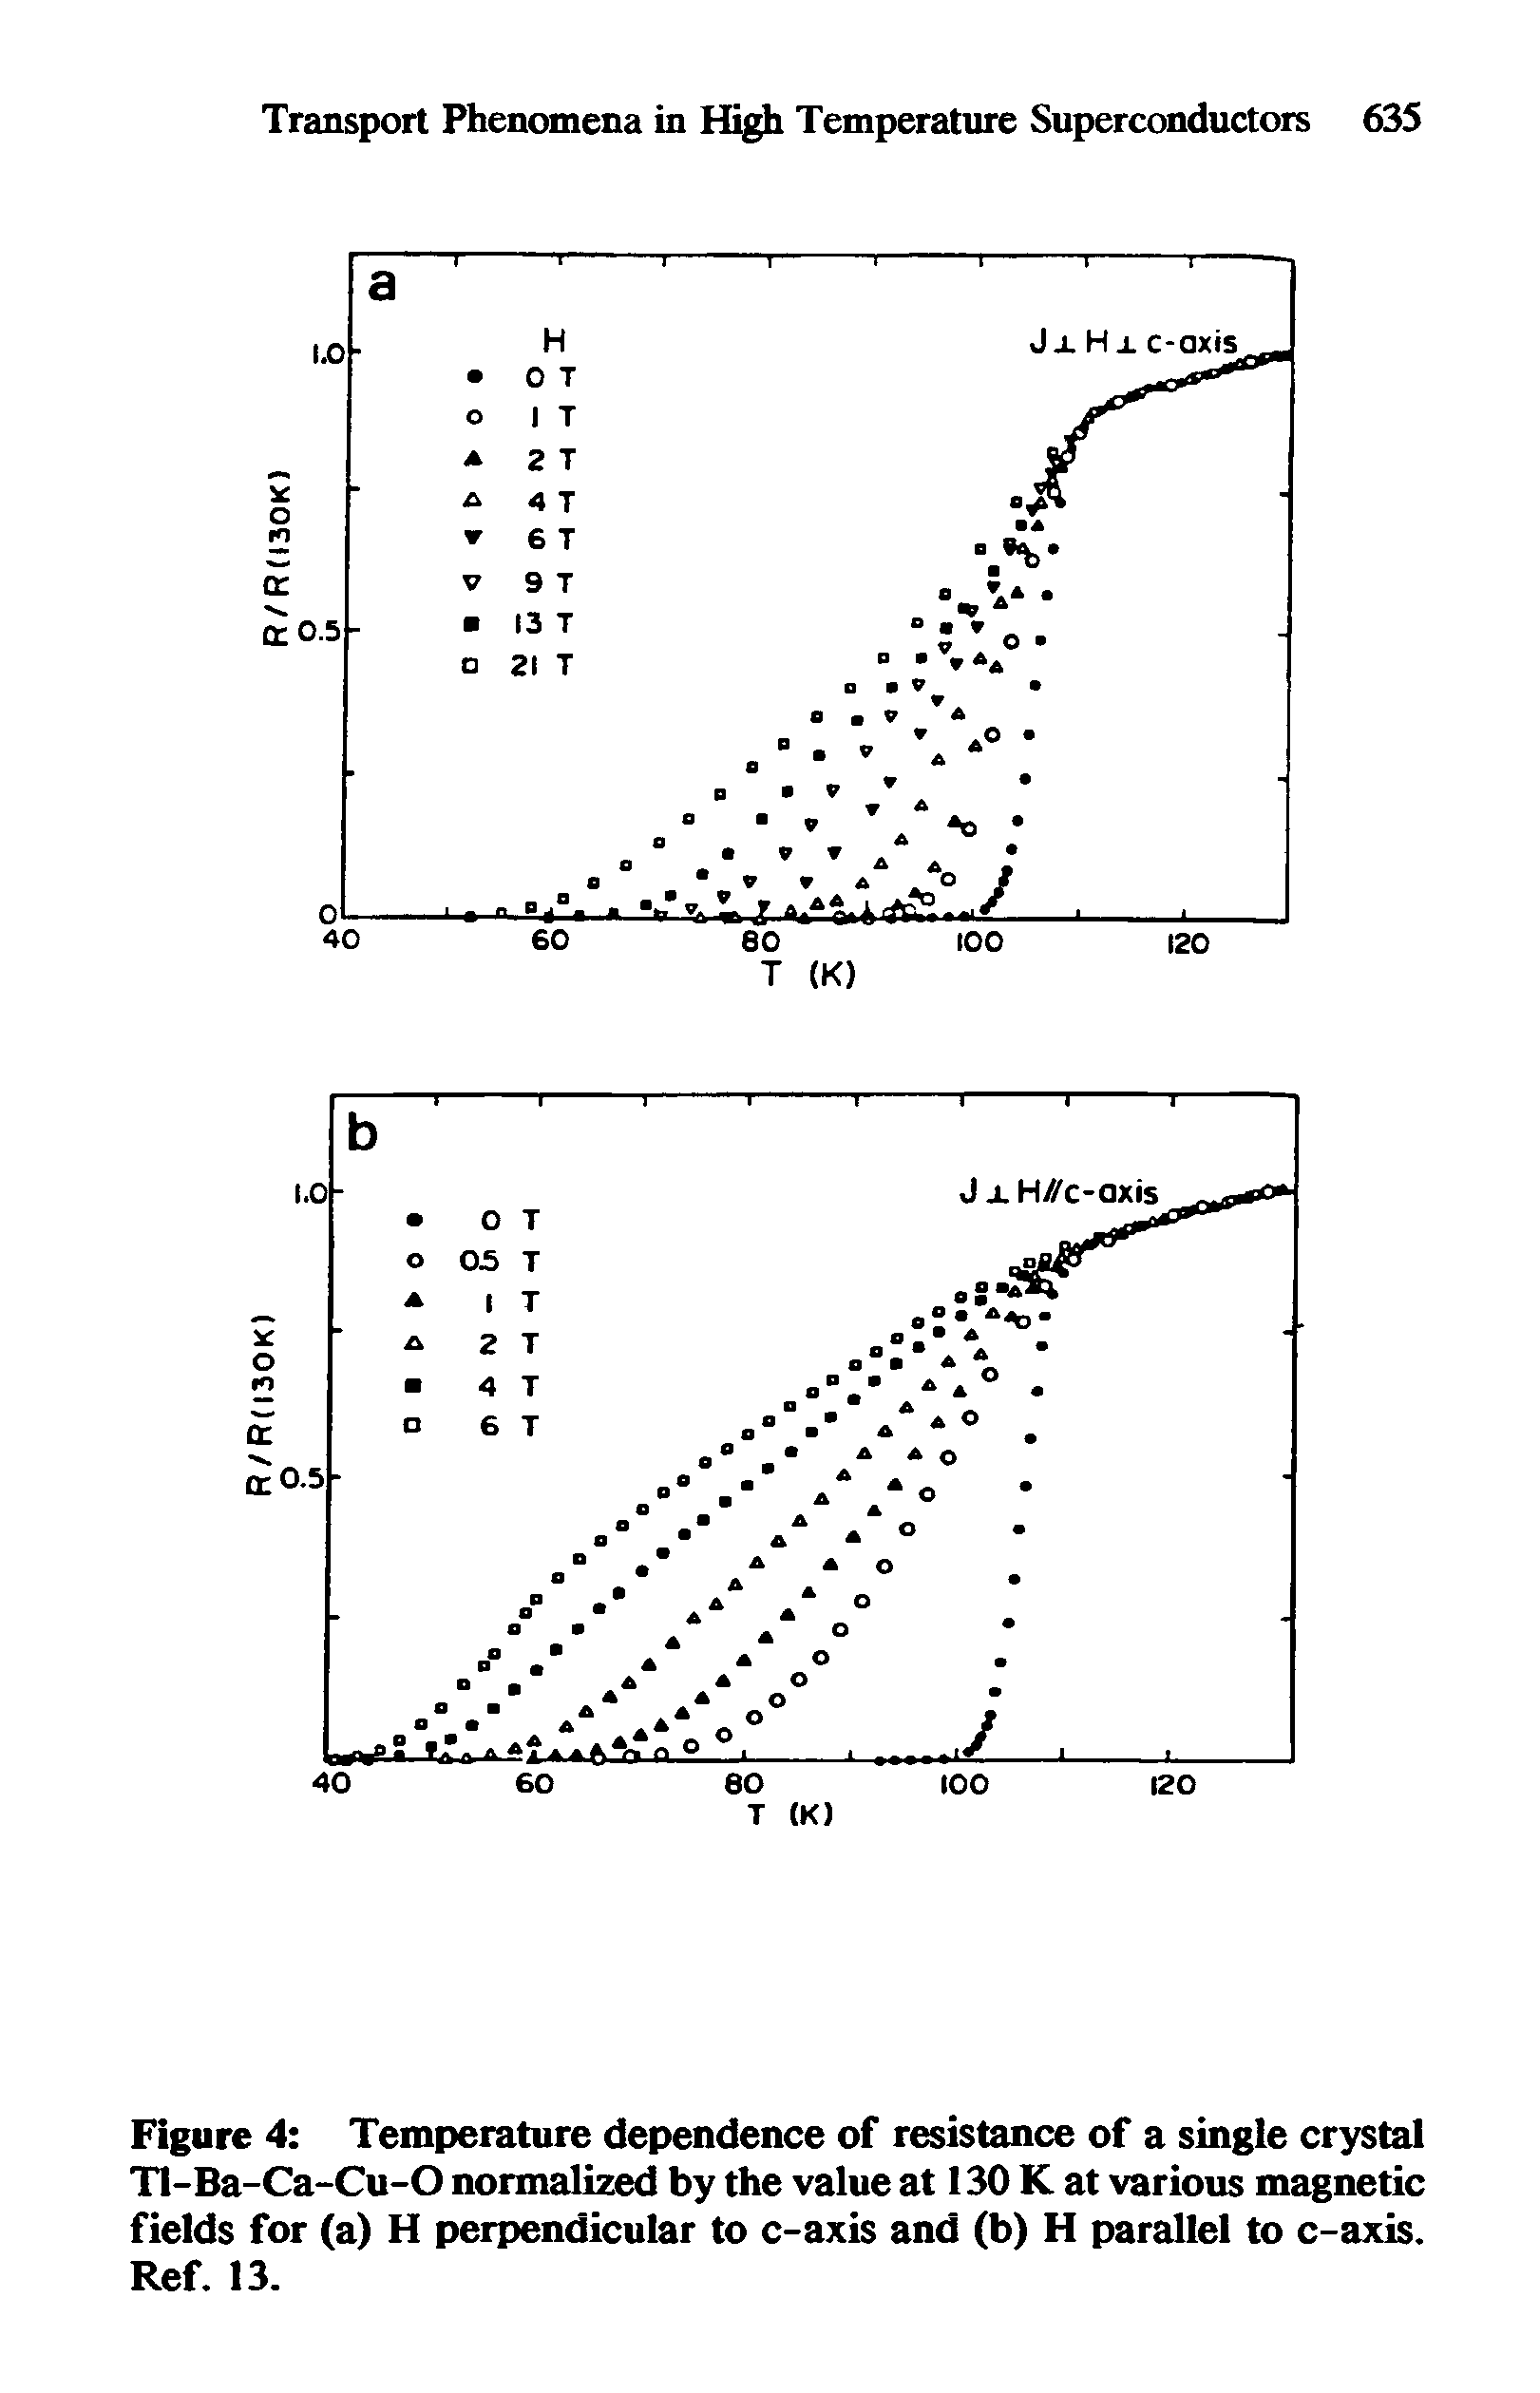 Figure 4 Temperature dependence of resistance of a single crystal Tl-Ba-Ca-Cu-O normalized by the value at 130 K at various magnetic fields for (a) H perpendicular to c-axis and (b) H parallel to c-axis. Ref. 13.